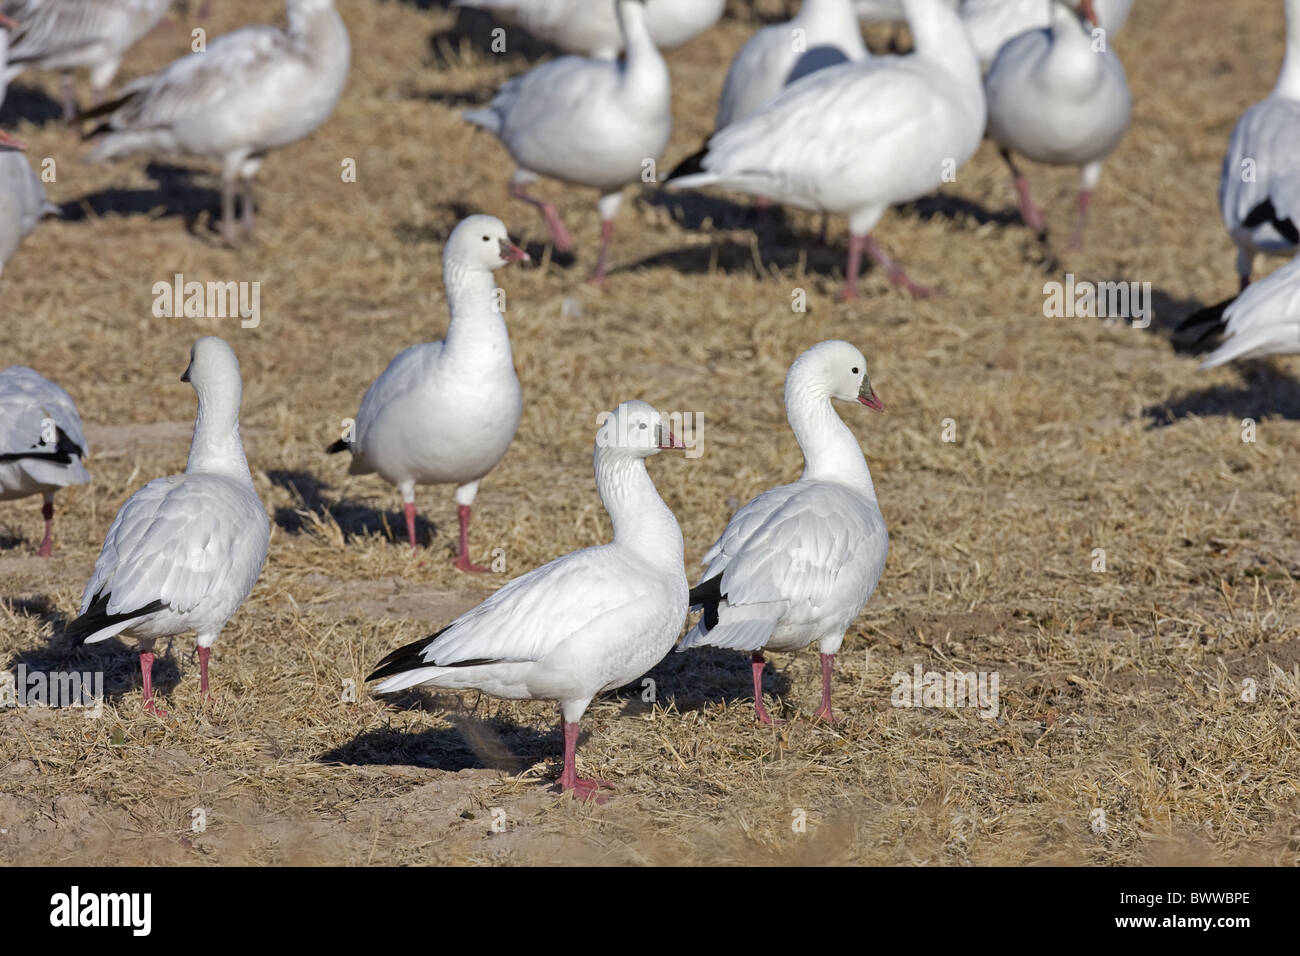 Ross's Goose (Anser rossii) four adults, standing amongst Snow Goose (Anser caerulescens) flock, Bosque del Apache, New Mexico, Stock Photo